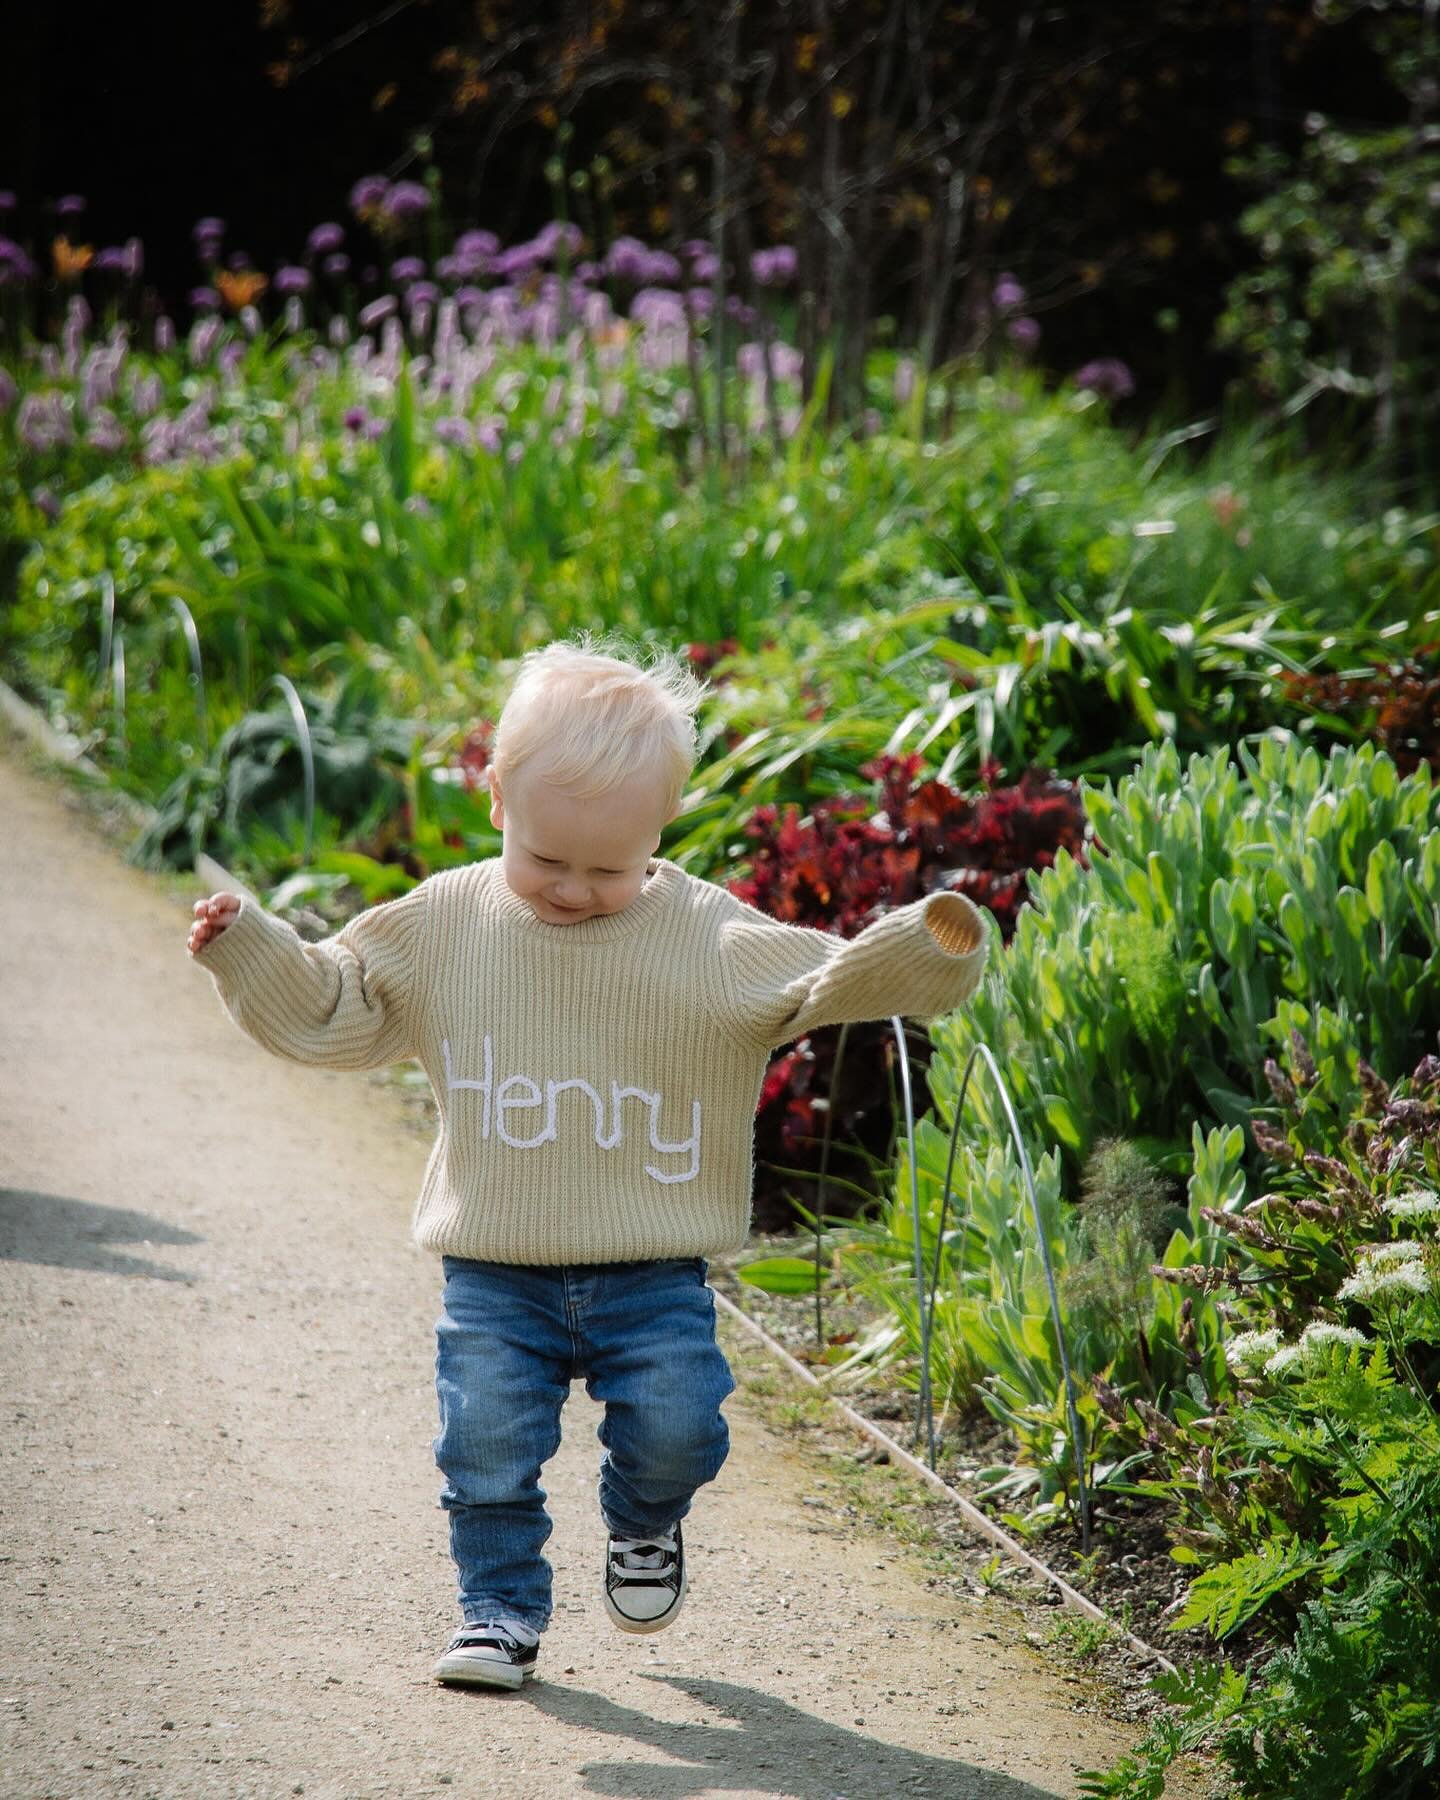 Happy Friday! Let&rsquo;s all enjoy the long-awaited sunshine 🌞
.
.
#photography #ukphotographer #wimpole #nationaltrust #familyphotography